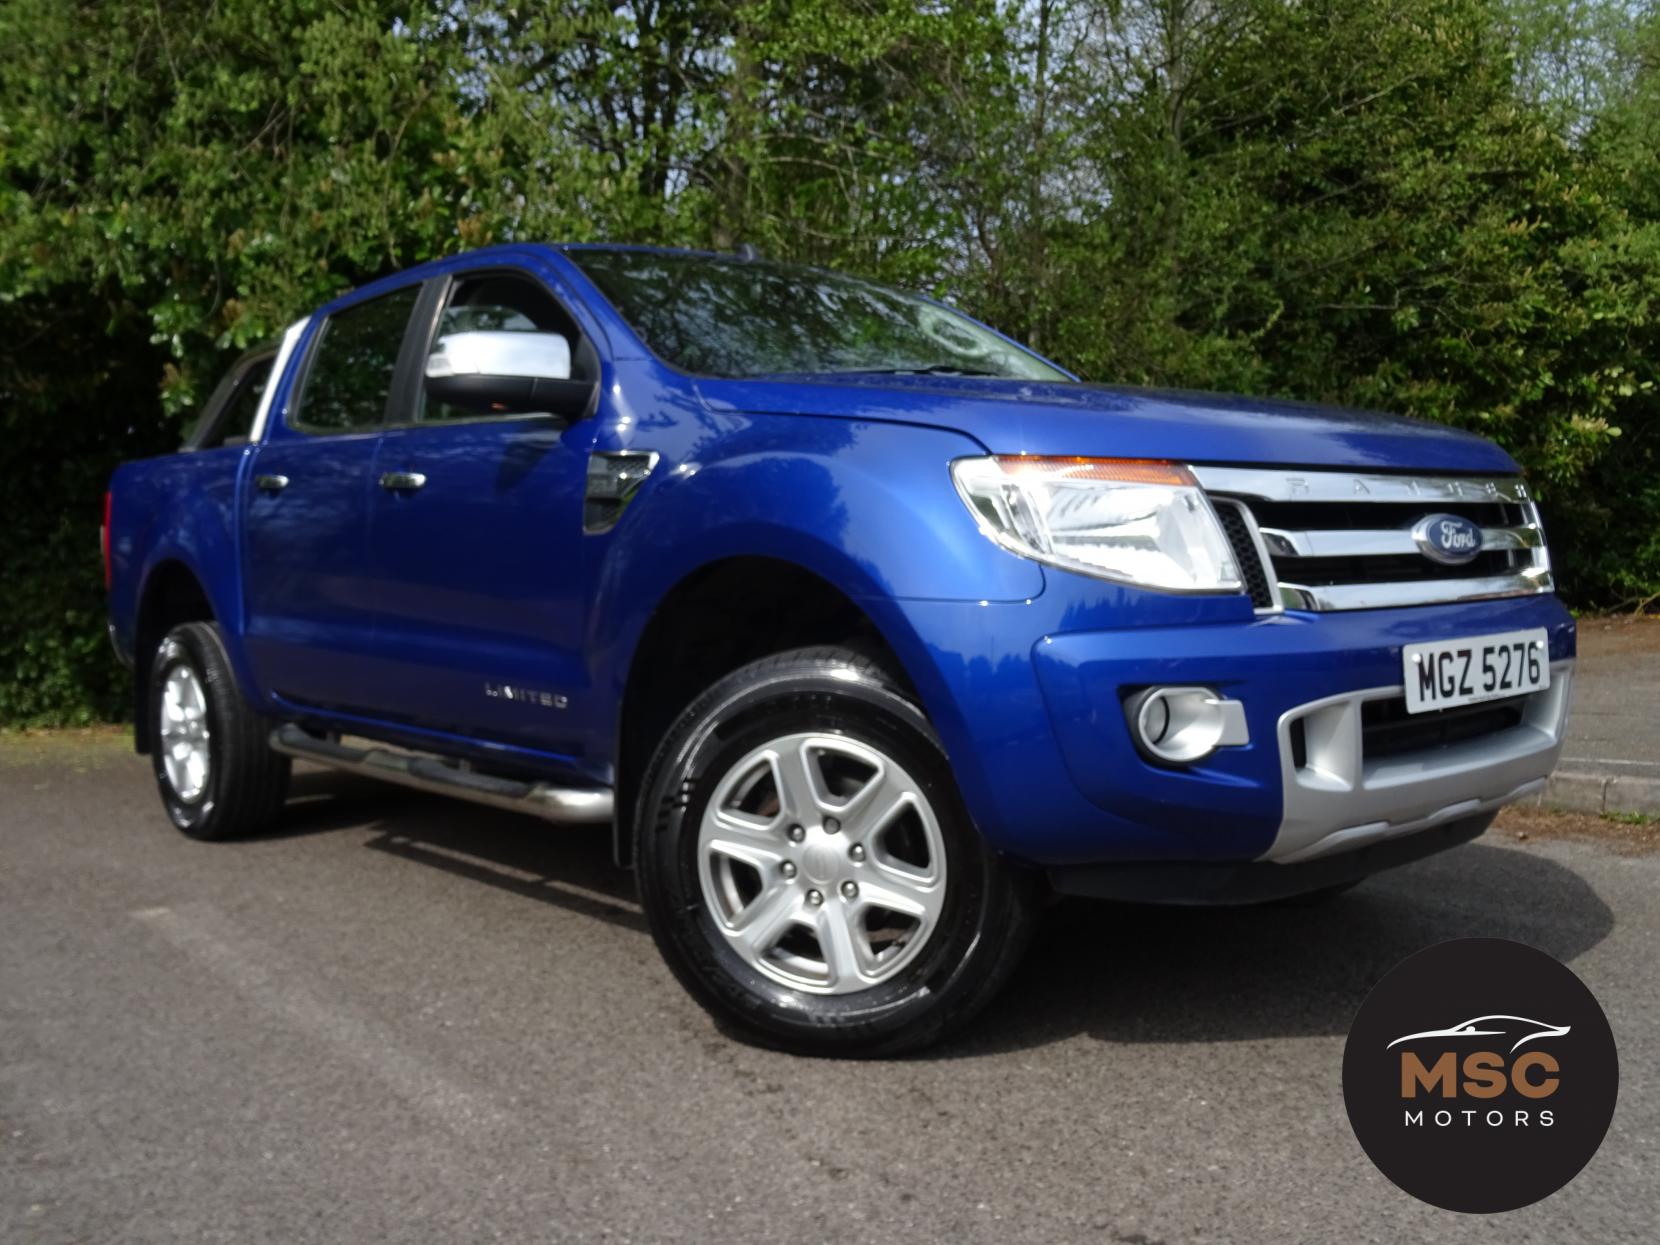 Ford Ranger 2.2 TDCi Limited 2 Double Cab Pickup 4dr Diesel Manual 4WD (Euro 5) (148 bhp)